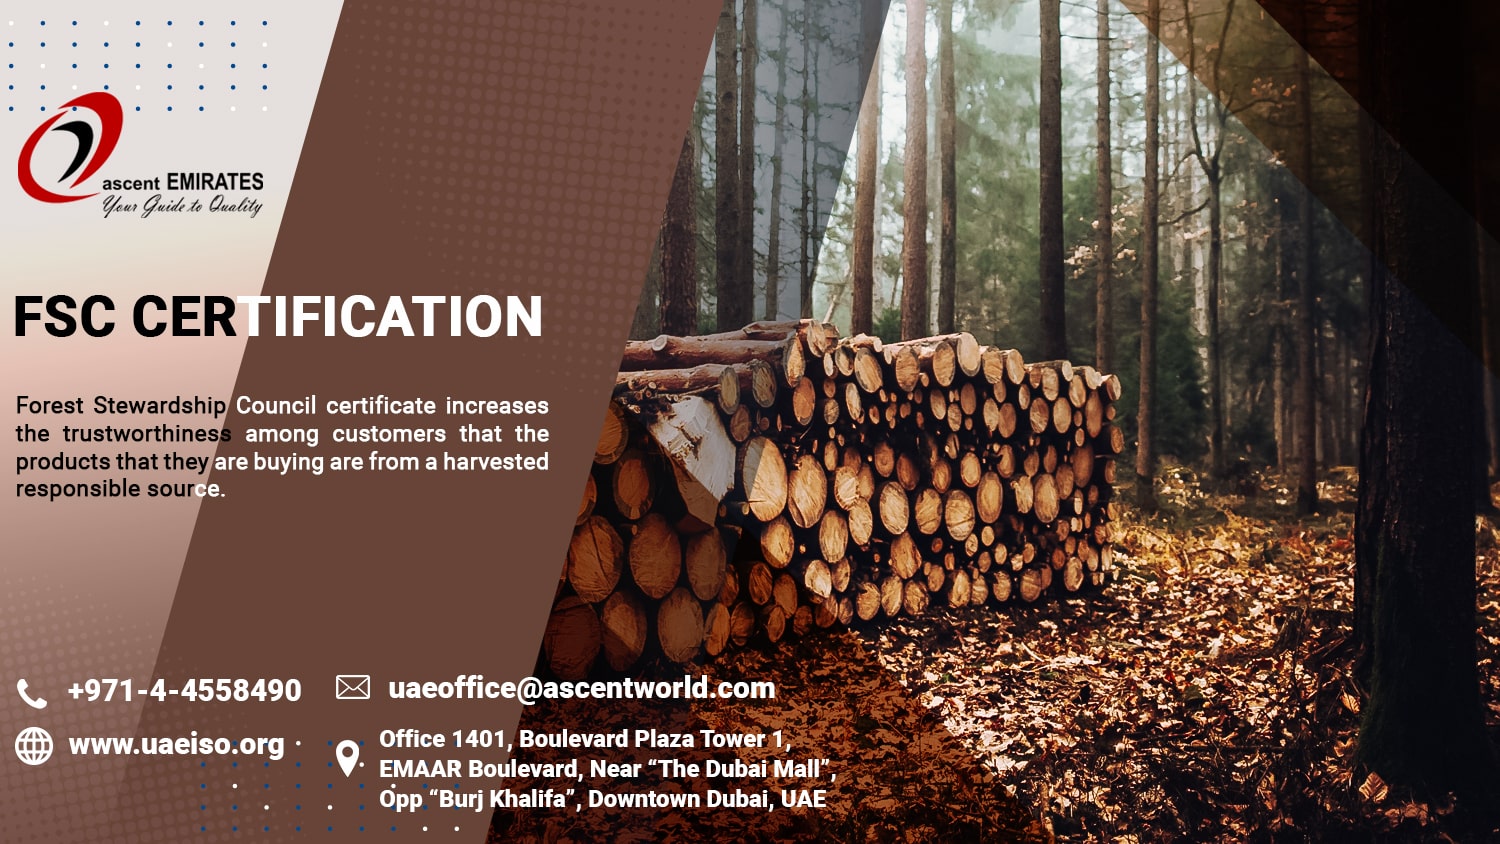 FSC Forest Stewardship Council in UAE to Promote Forest Management Practices